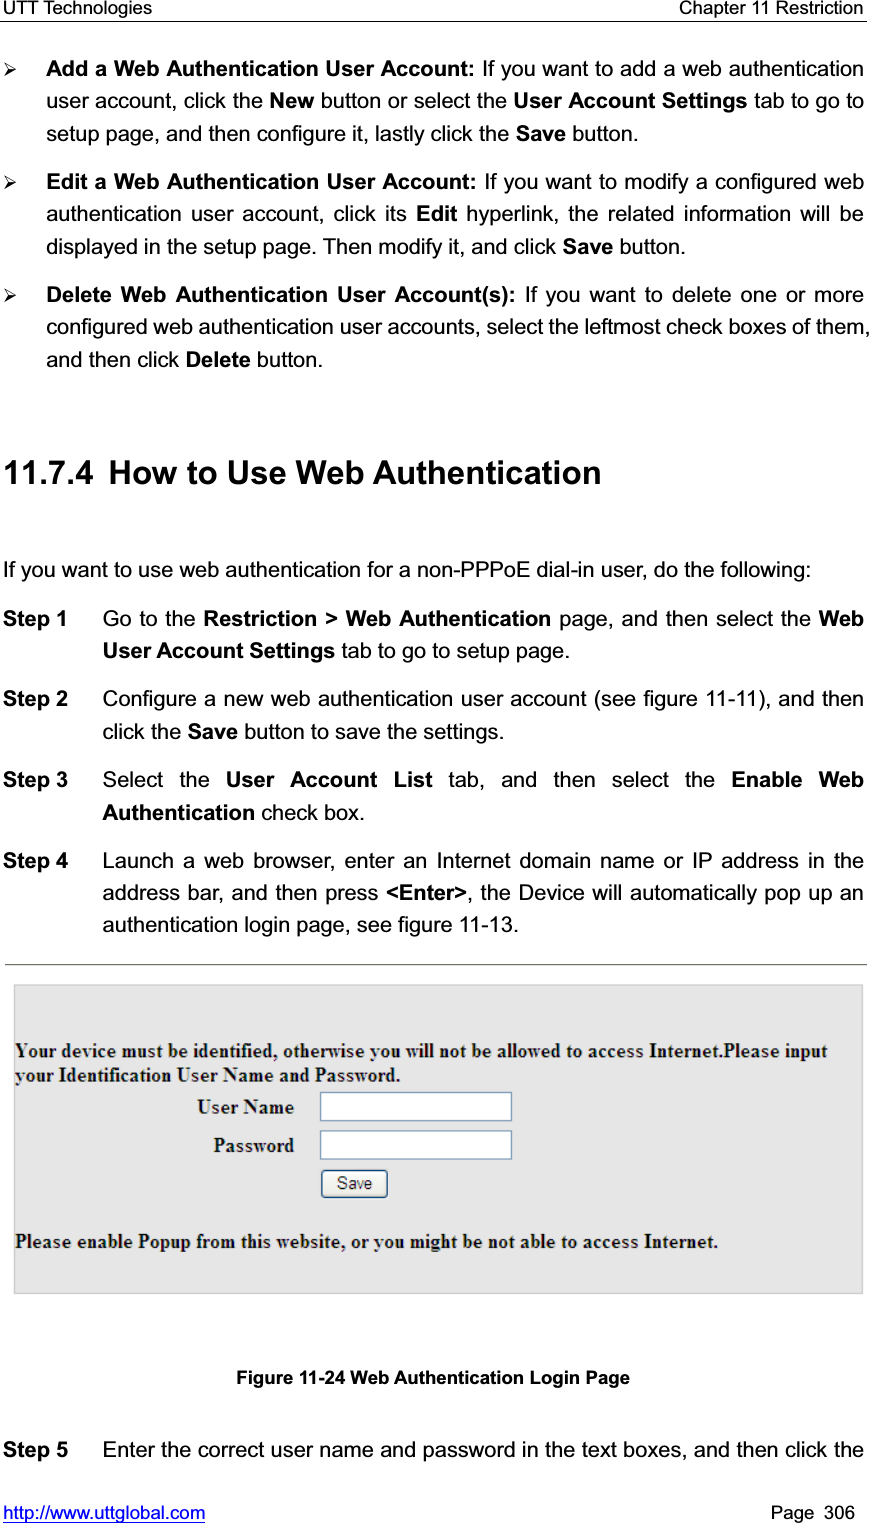 UTT Technologies    Chapter 11 Restriction   http://www.uttglobal.com Page 306 ¾Add a Web Authentication User Account: If you want to add a web authentication user account, click the New button or select the User Account Settings tab to go to setup page, and then configure it, lastly click the Save button. ¾Edit a Web Authentication User Account: If you want to modify a configured web authentication user account, click its Edit hyperlink, the related information will be displayed in the setup page. Then modify it, and click Save button.  ¾Delete Web Authentication User Account(s): If you want to delete one or more configured web authentication user accounts, select the leftmost check boxes of them, and then click Delete button. 11.7.4  How to Use Web Authentication If you want to use web authentication for a non-PPPoE dial-in user, do the following:   Step 1  Go to the Restriction &gt; Web Authentication page, and then select the Web User Account Settings tab to go to setup page. Step 2  Configure a new web authentication user account (see figure 11-11), and thenclick the Save button to save the settings.   Step 3  Select the User Account List tab, and then select the Enable Web Authentication check box. Step 4  Launch a web browser, enter an Internet domain name or IP address in the address bar, and then press &lt;Enter&gt;, the Device will automatically pop up an authentication login page, see figure 11-13. Figure 11-24 Web Authentication Login Page Step 5  Enter the correct user name and password in the text boxes, and then click the